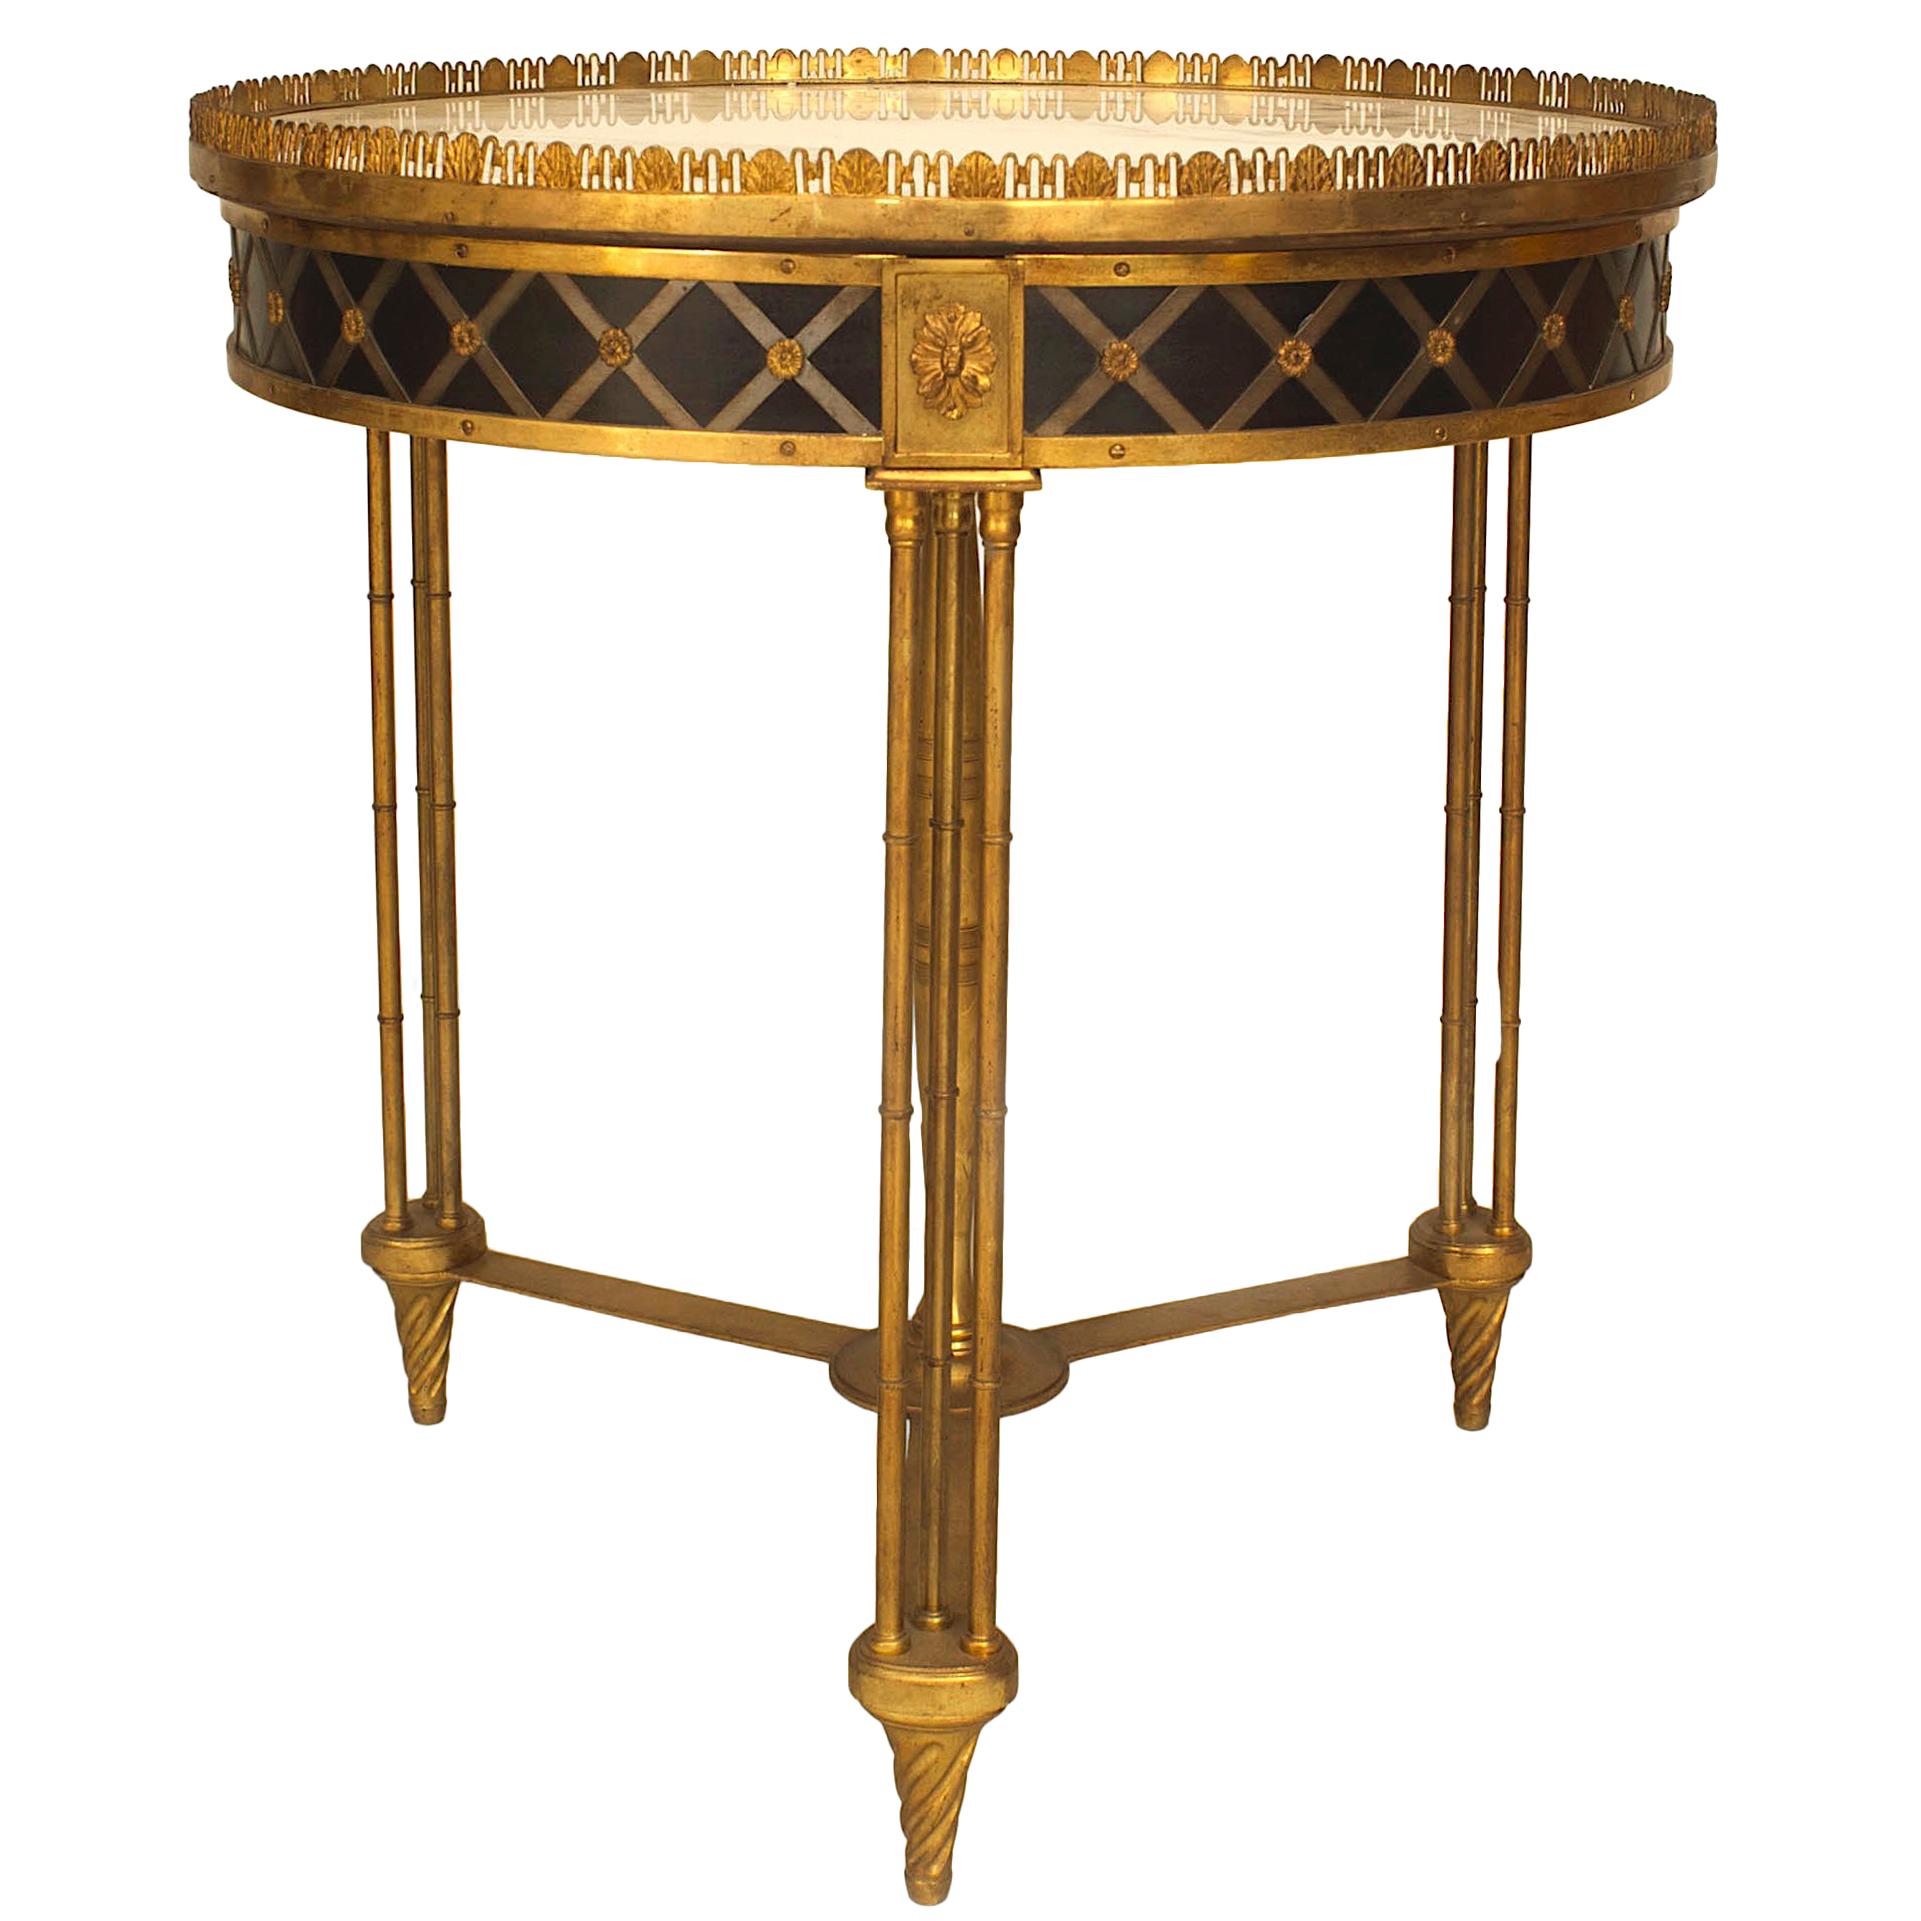 20th c. French Charles X Style Bronze Dore and Marble Gueridon Table